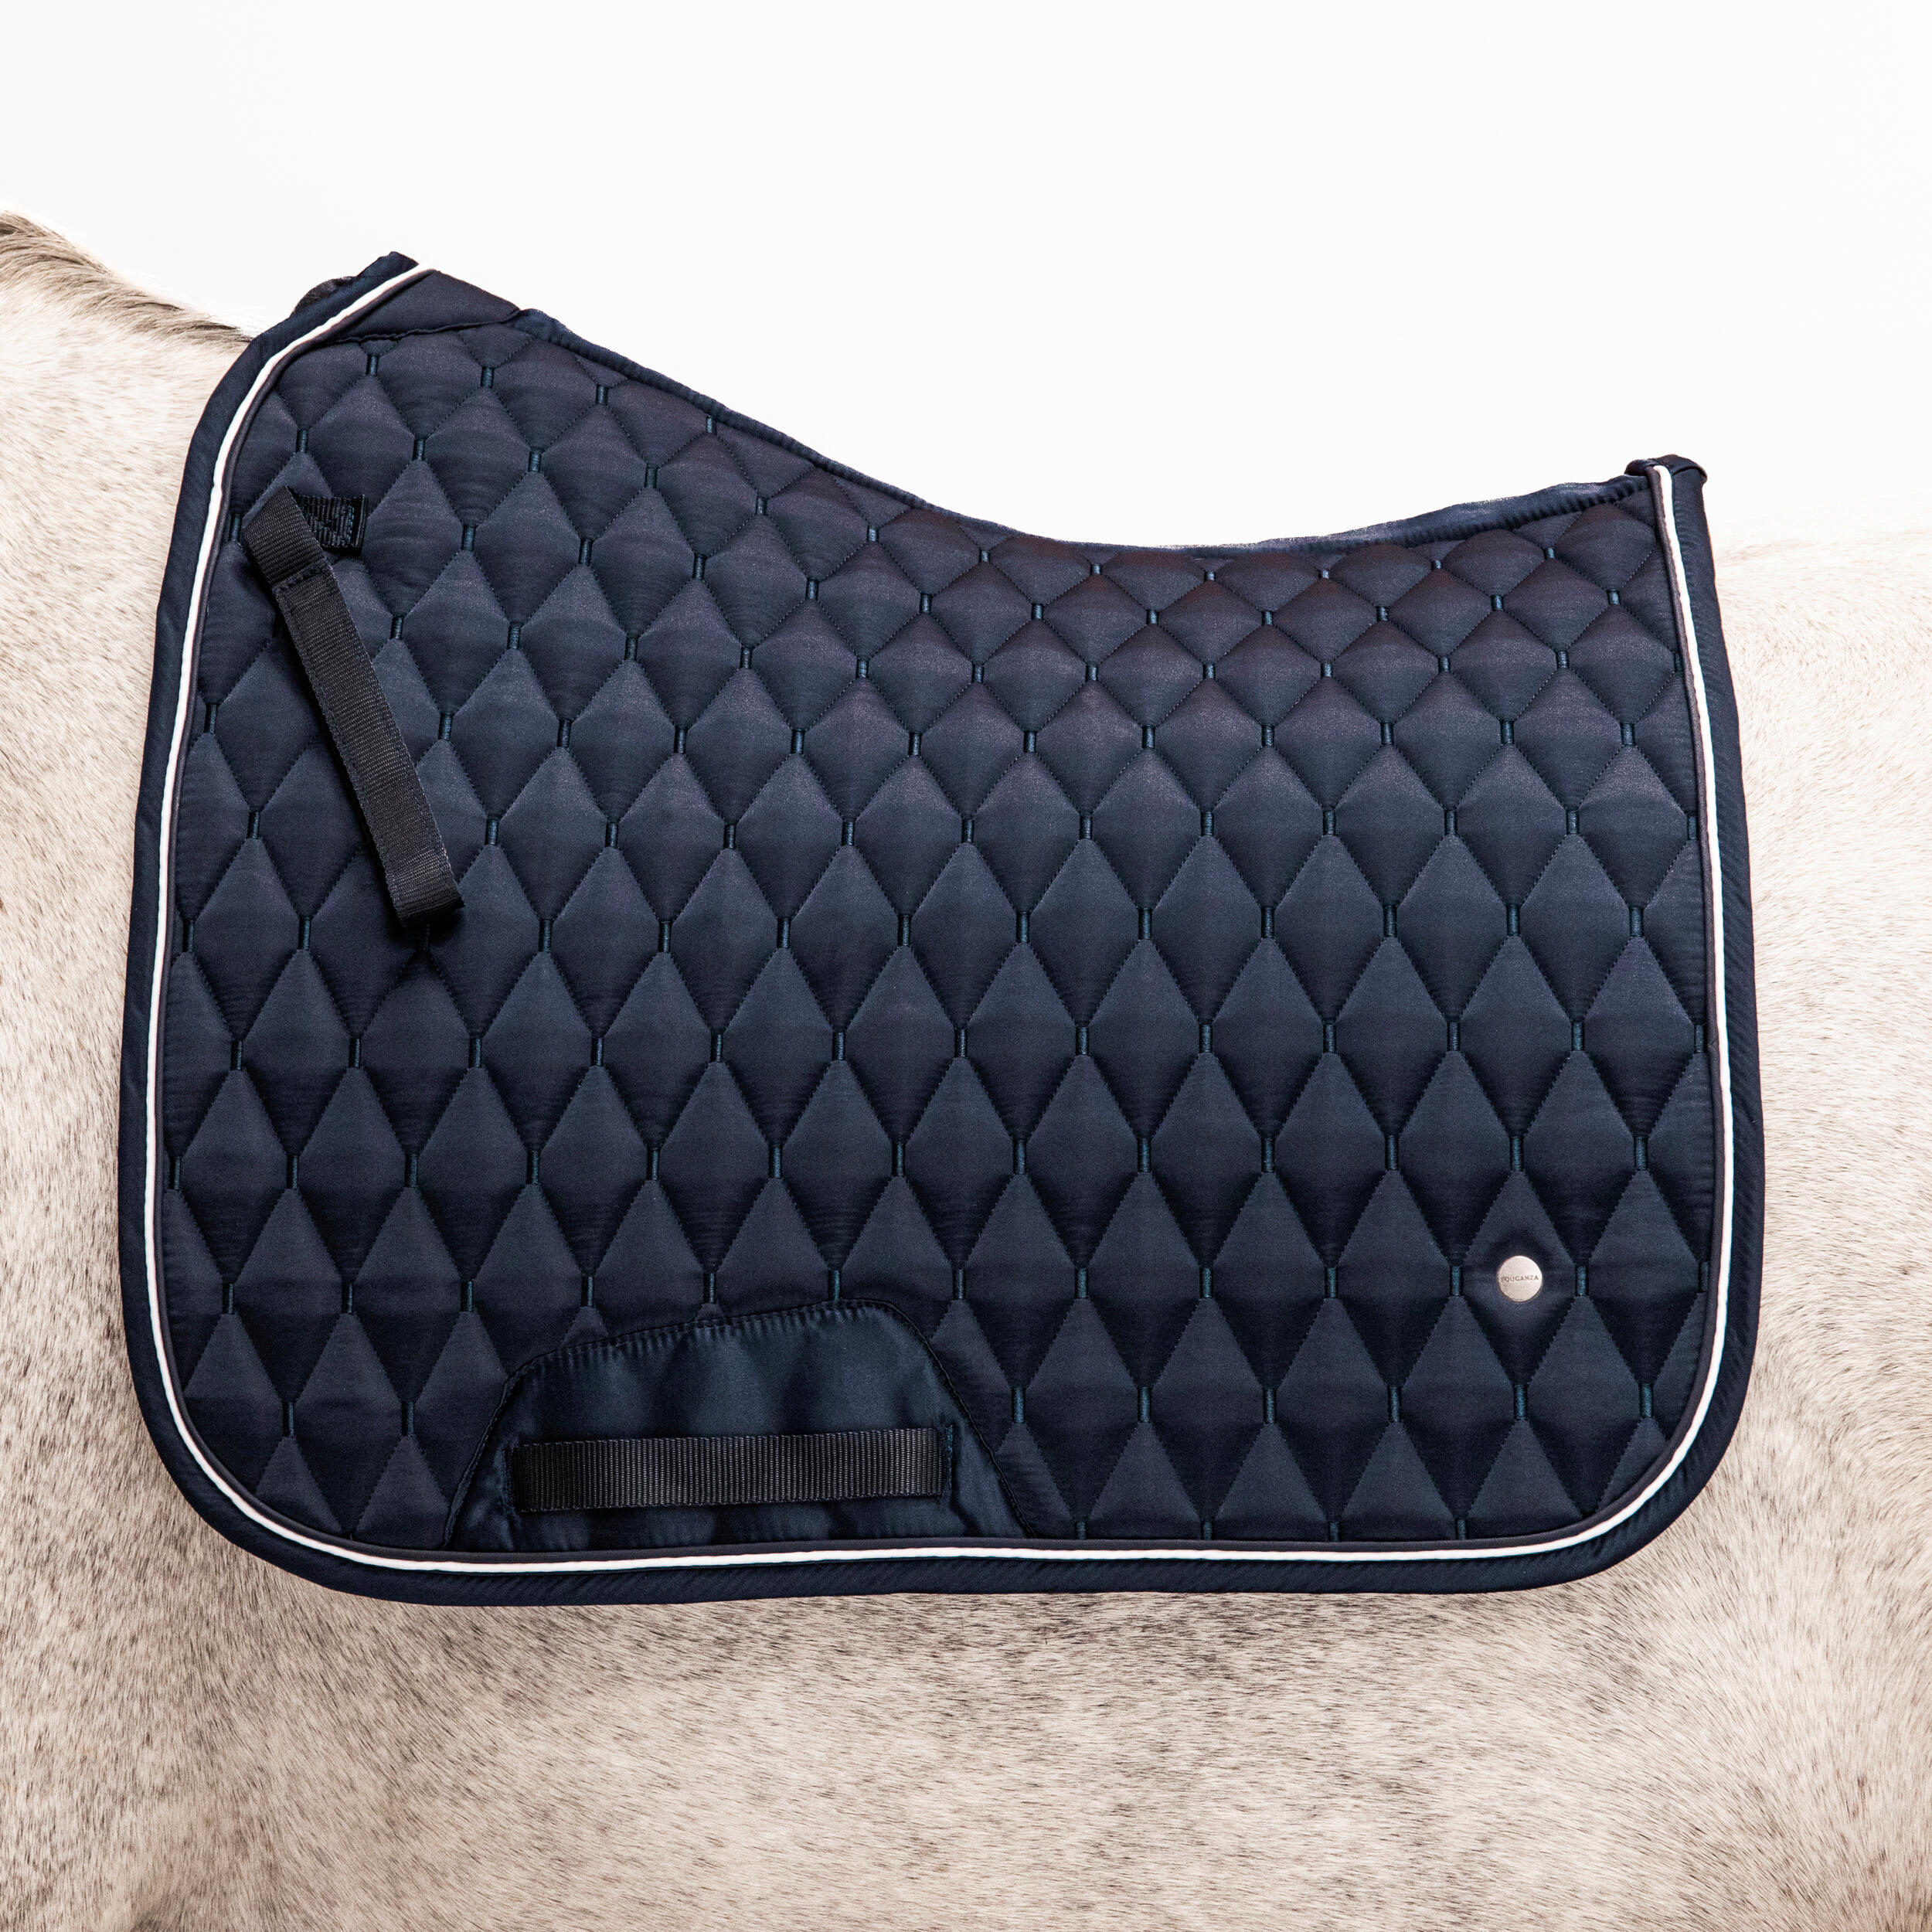 Horse Riding Dressage Saddle Cloth for Horse 900 - Navy 5/6